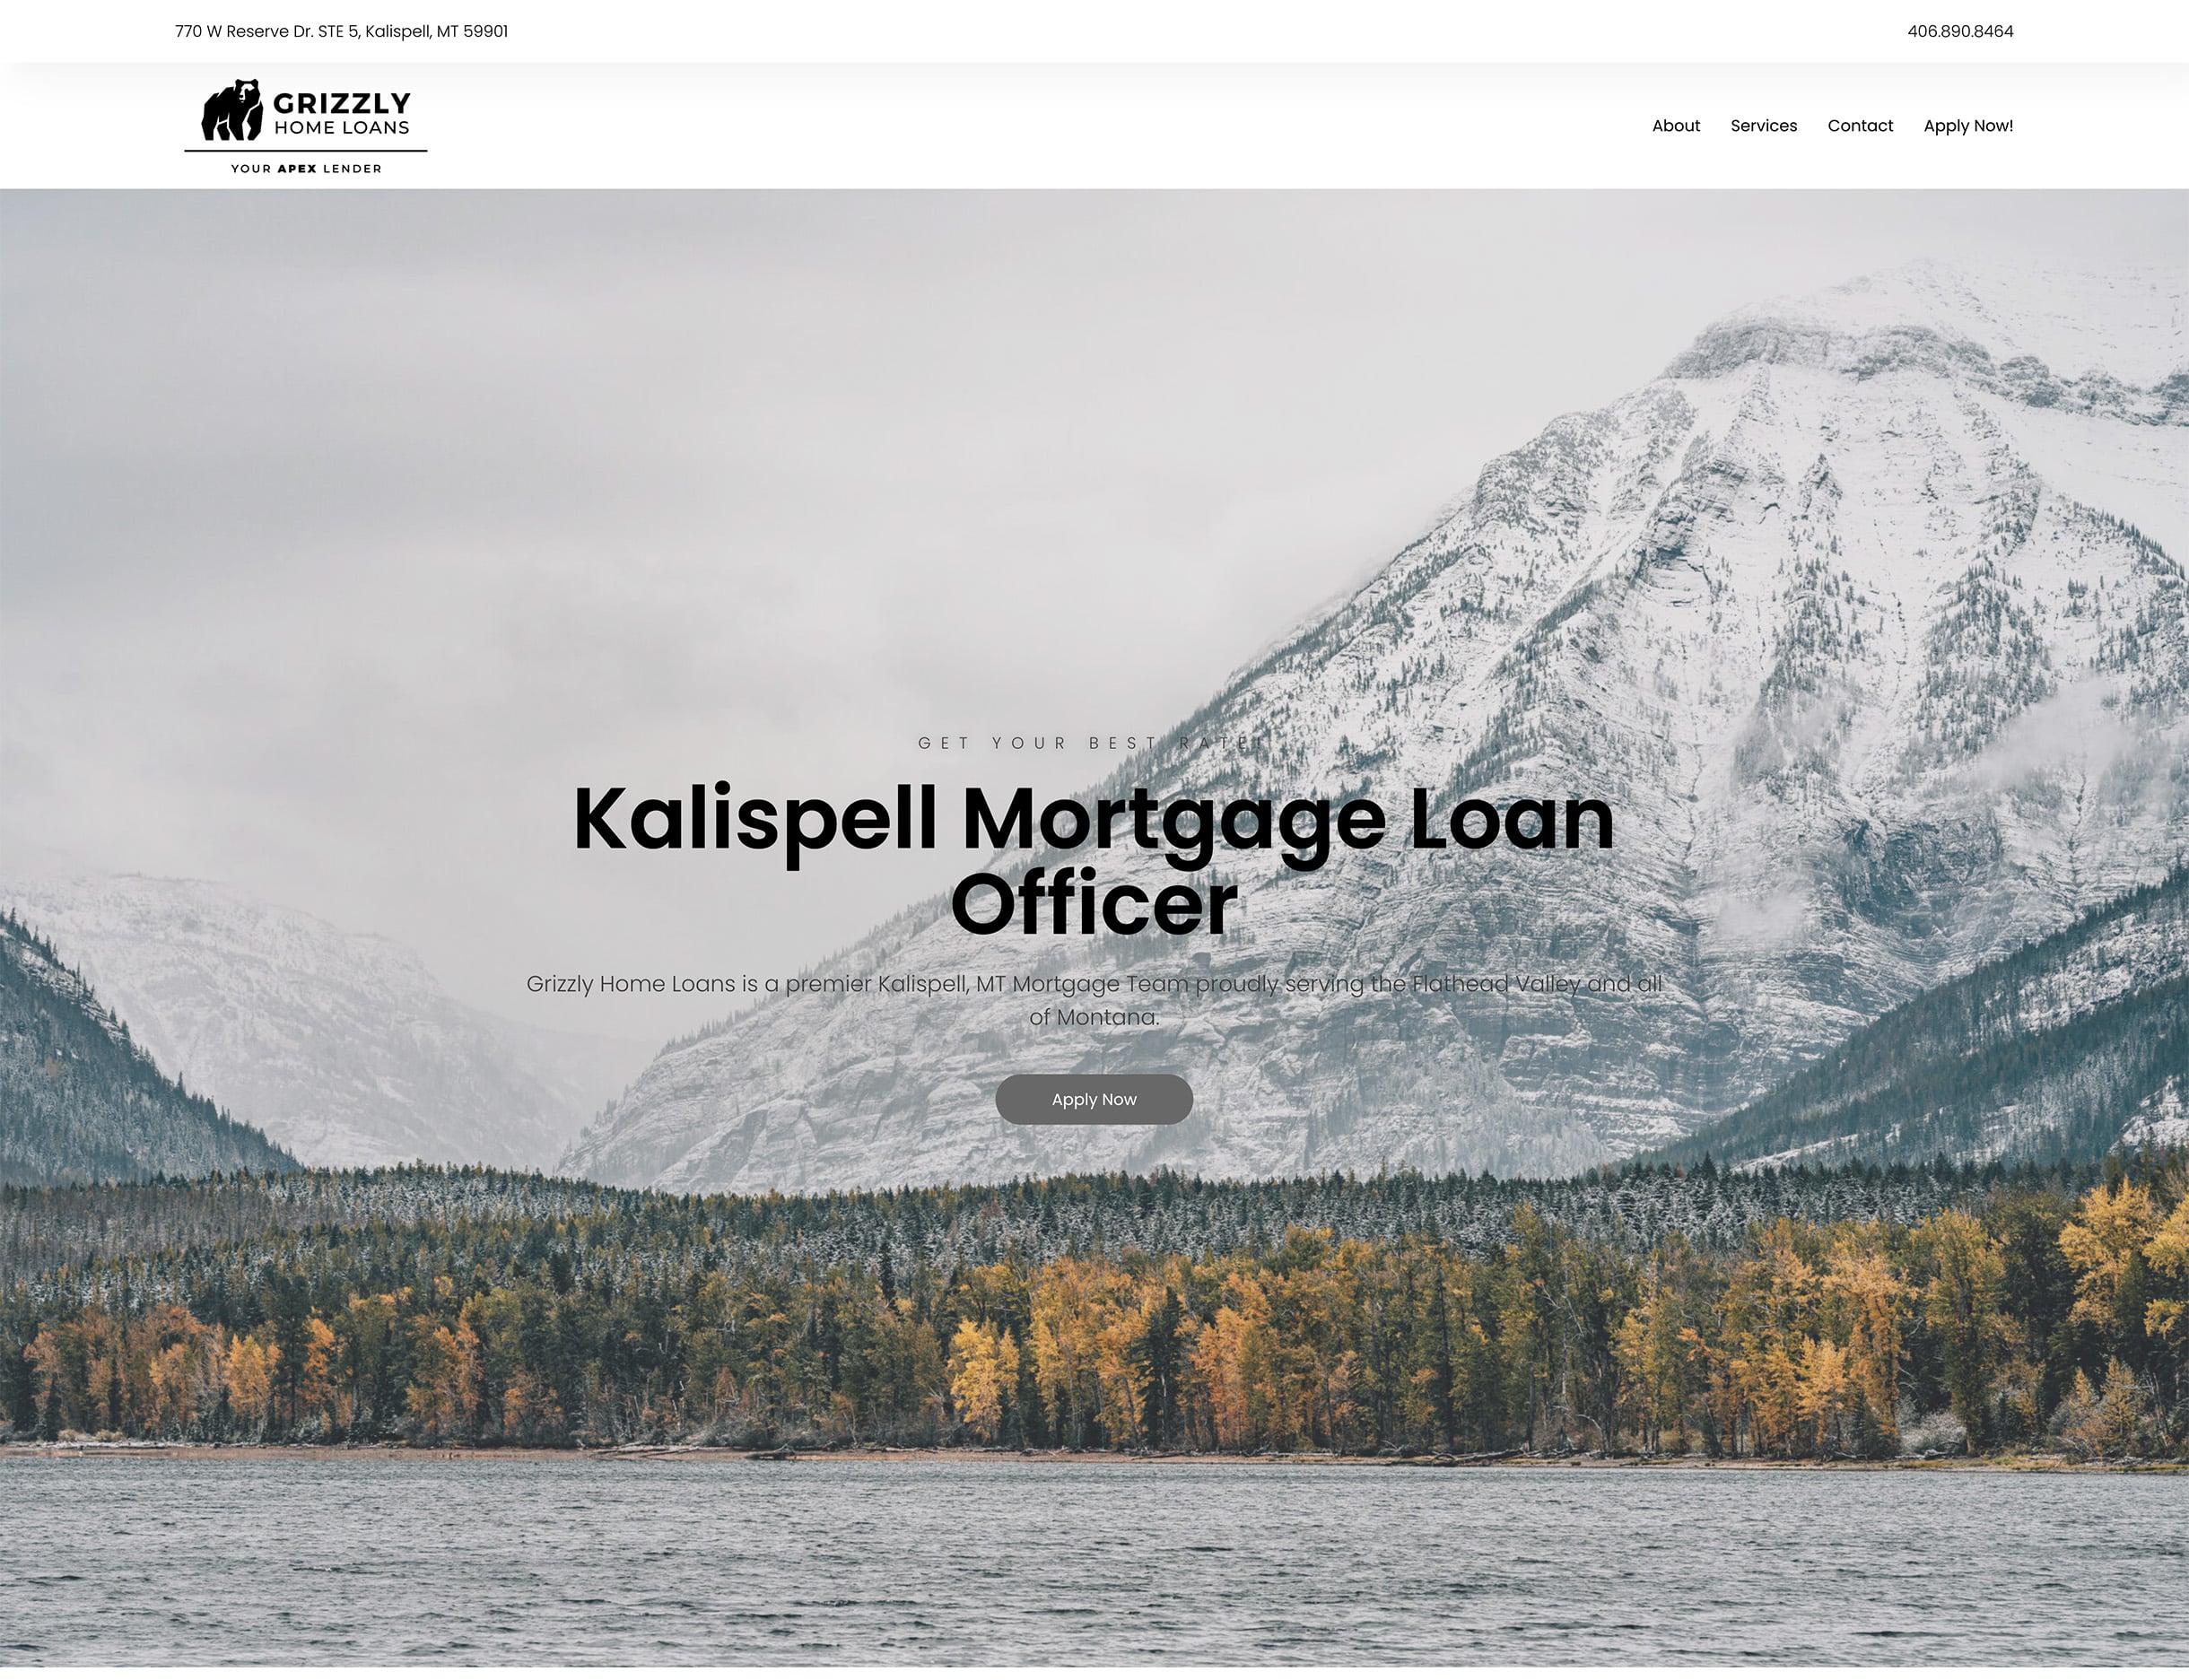 Grizzly Home Loans Website